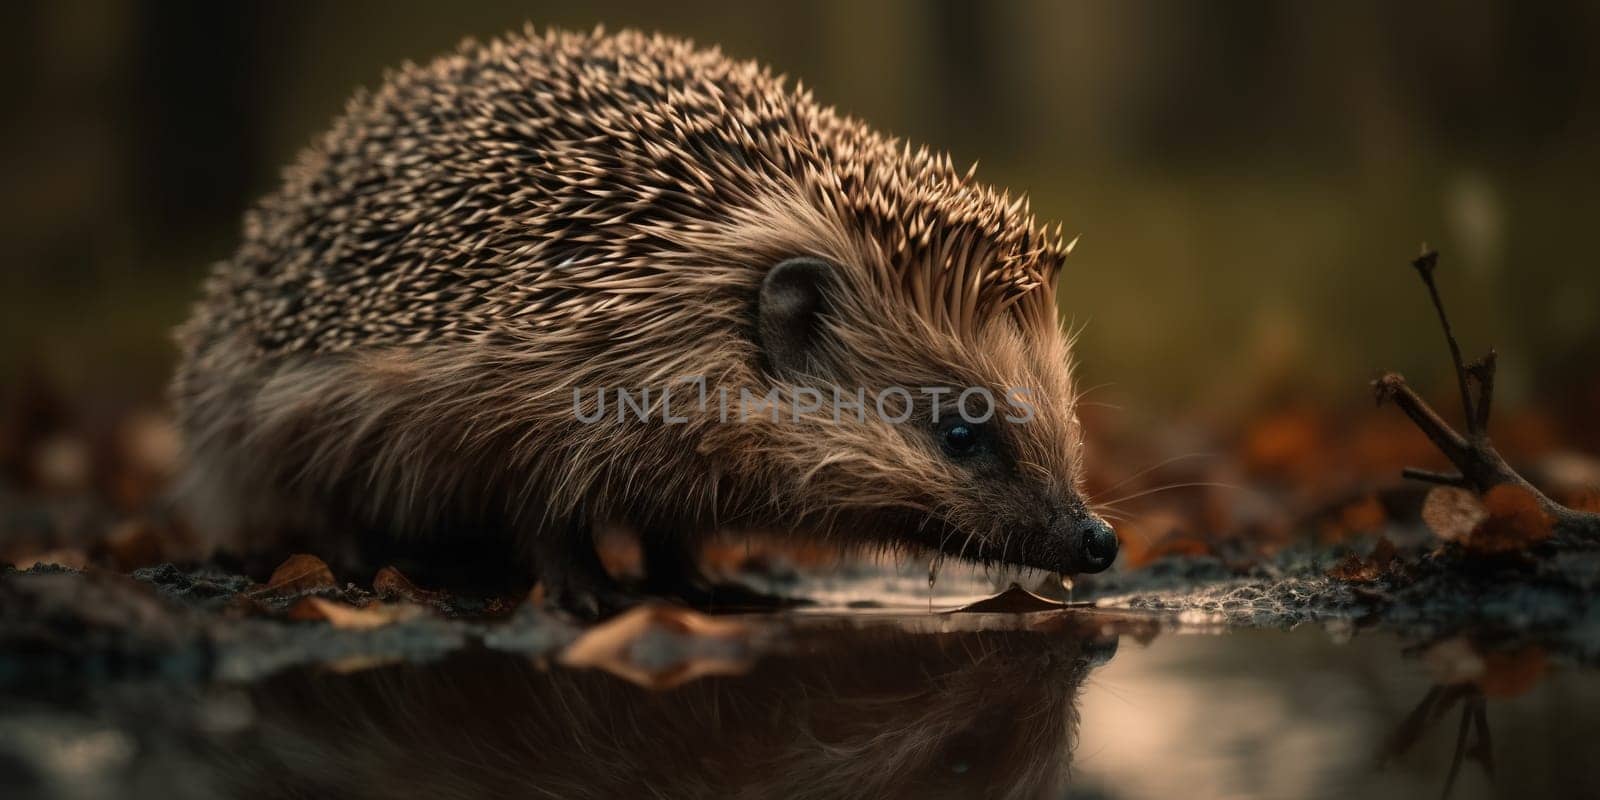 Wild Hedgehog Drinks Water From The Creek In The Forest, Animal In Natural Habitat